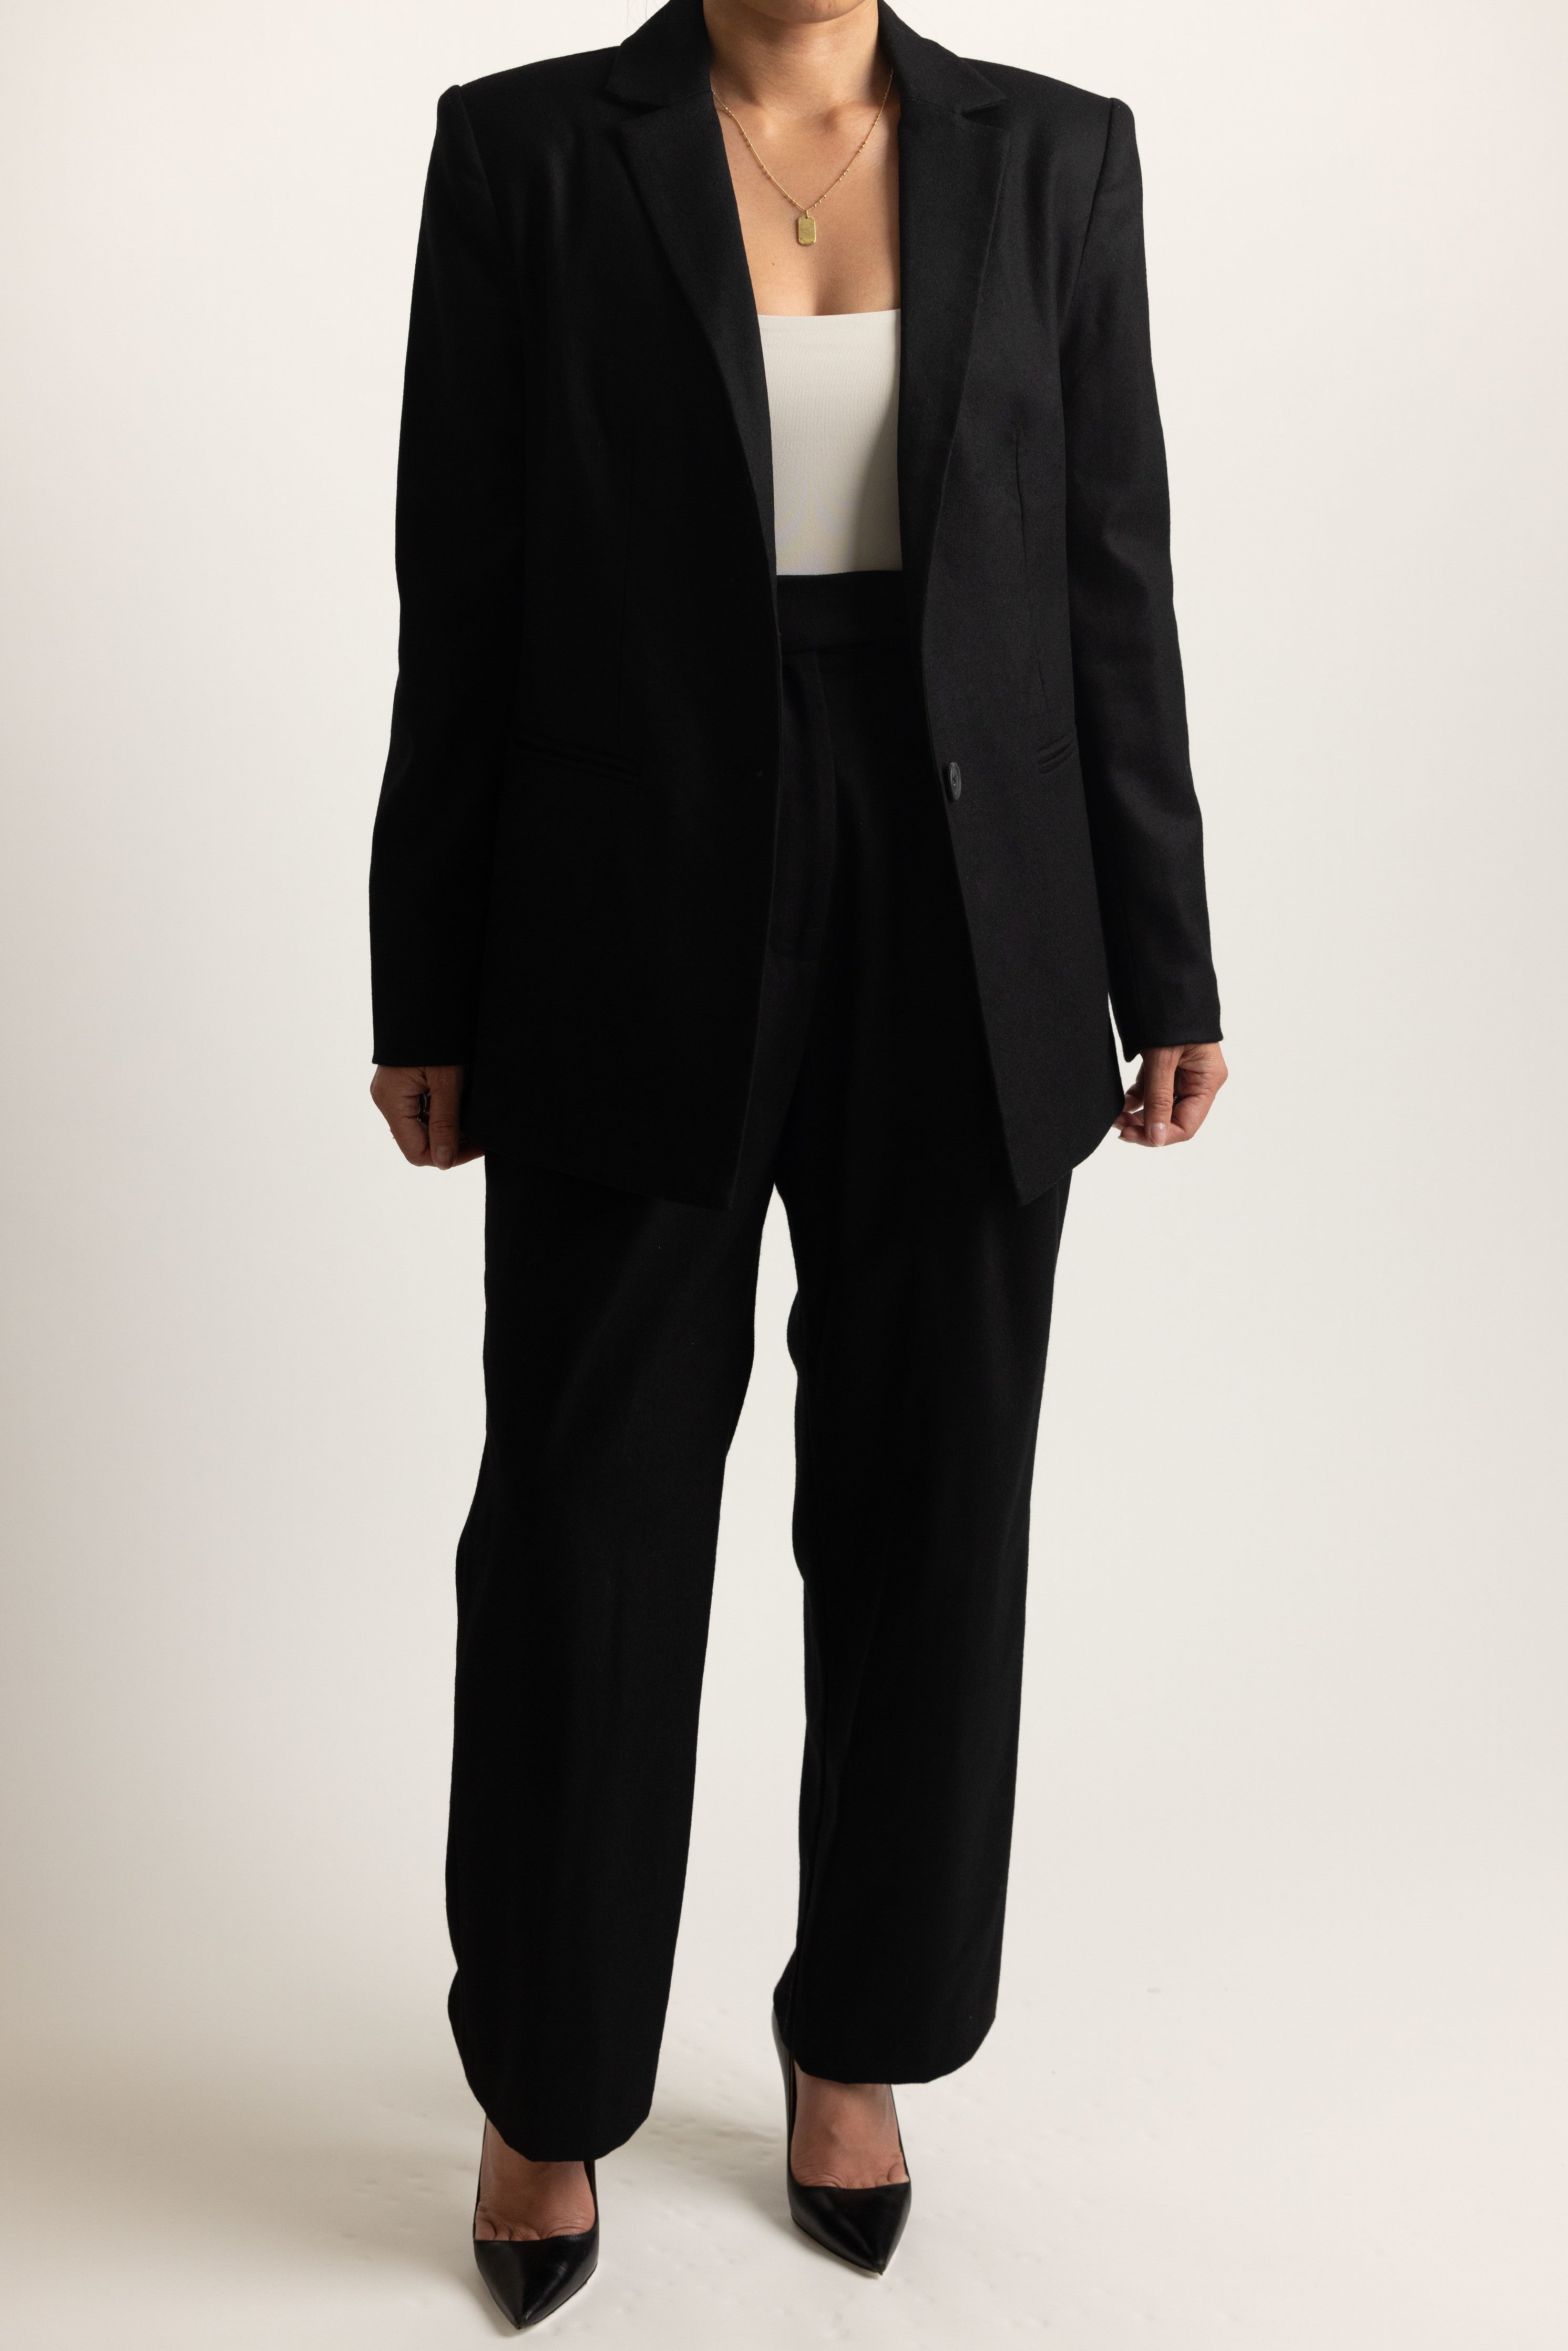 Trial Trouser and matching Court Jacket in Black